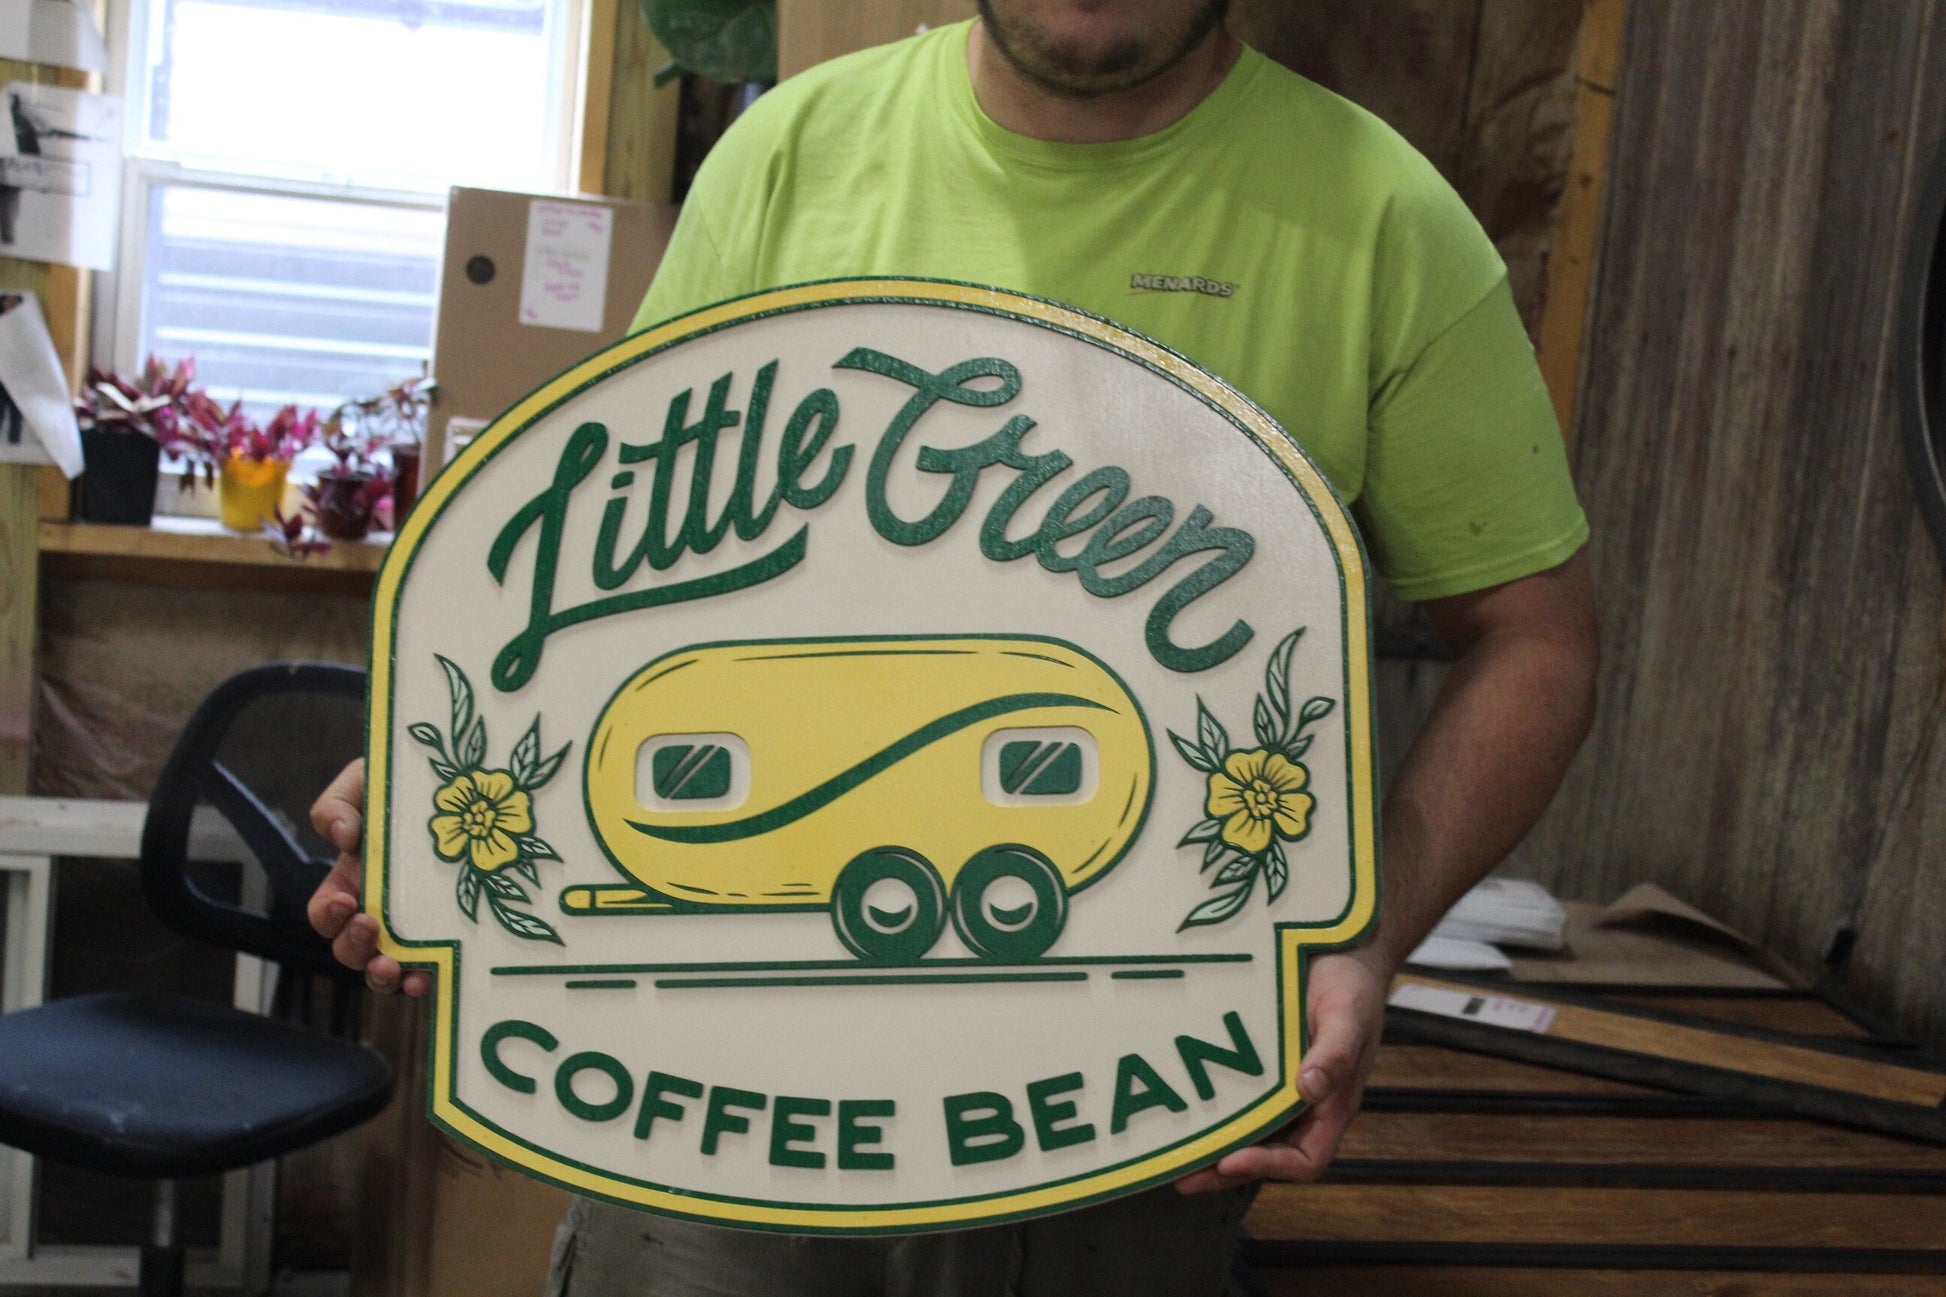 Coffee Shop Little Camper Coffee Bean Yellow Green Design Logo Image Large Round Custom Wood Sign Can Be Hanging Indoor Outdoor Minimalist